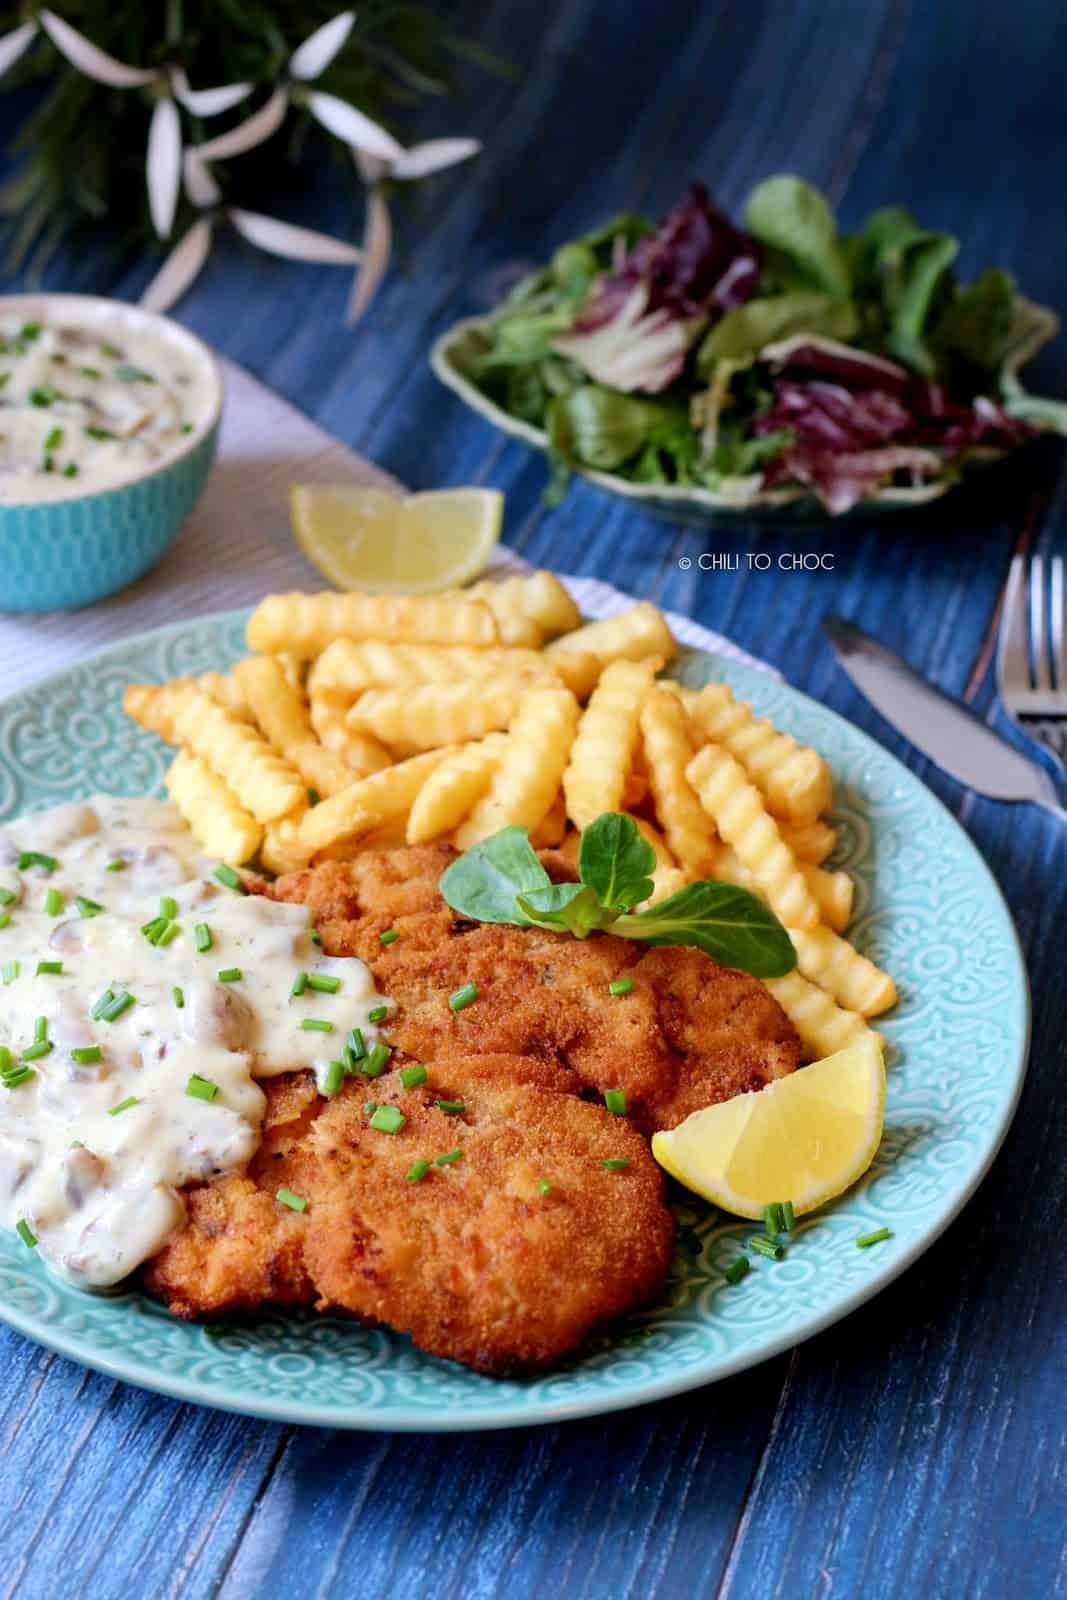 Chicken Schnitzel served with mushroom sauce, fries, lemon wedge and a salad.